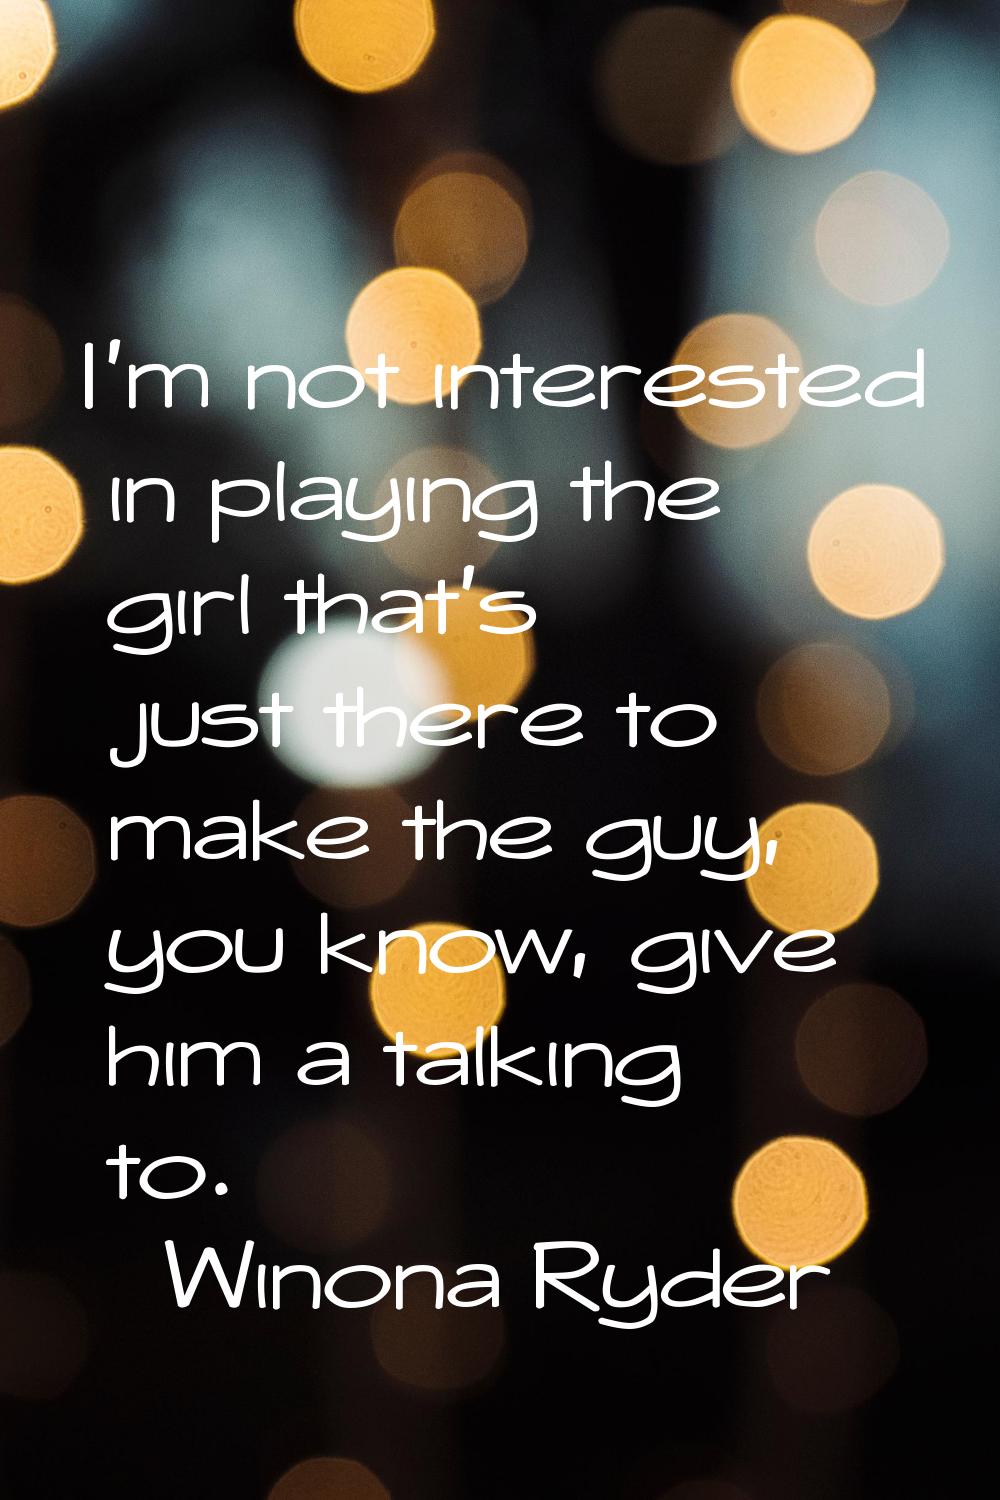 I'm not interested in playing the girl that's just there to make the guy, you know, give him a talk